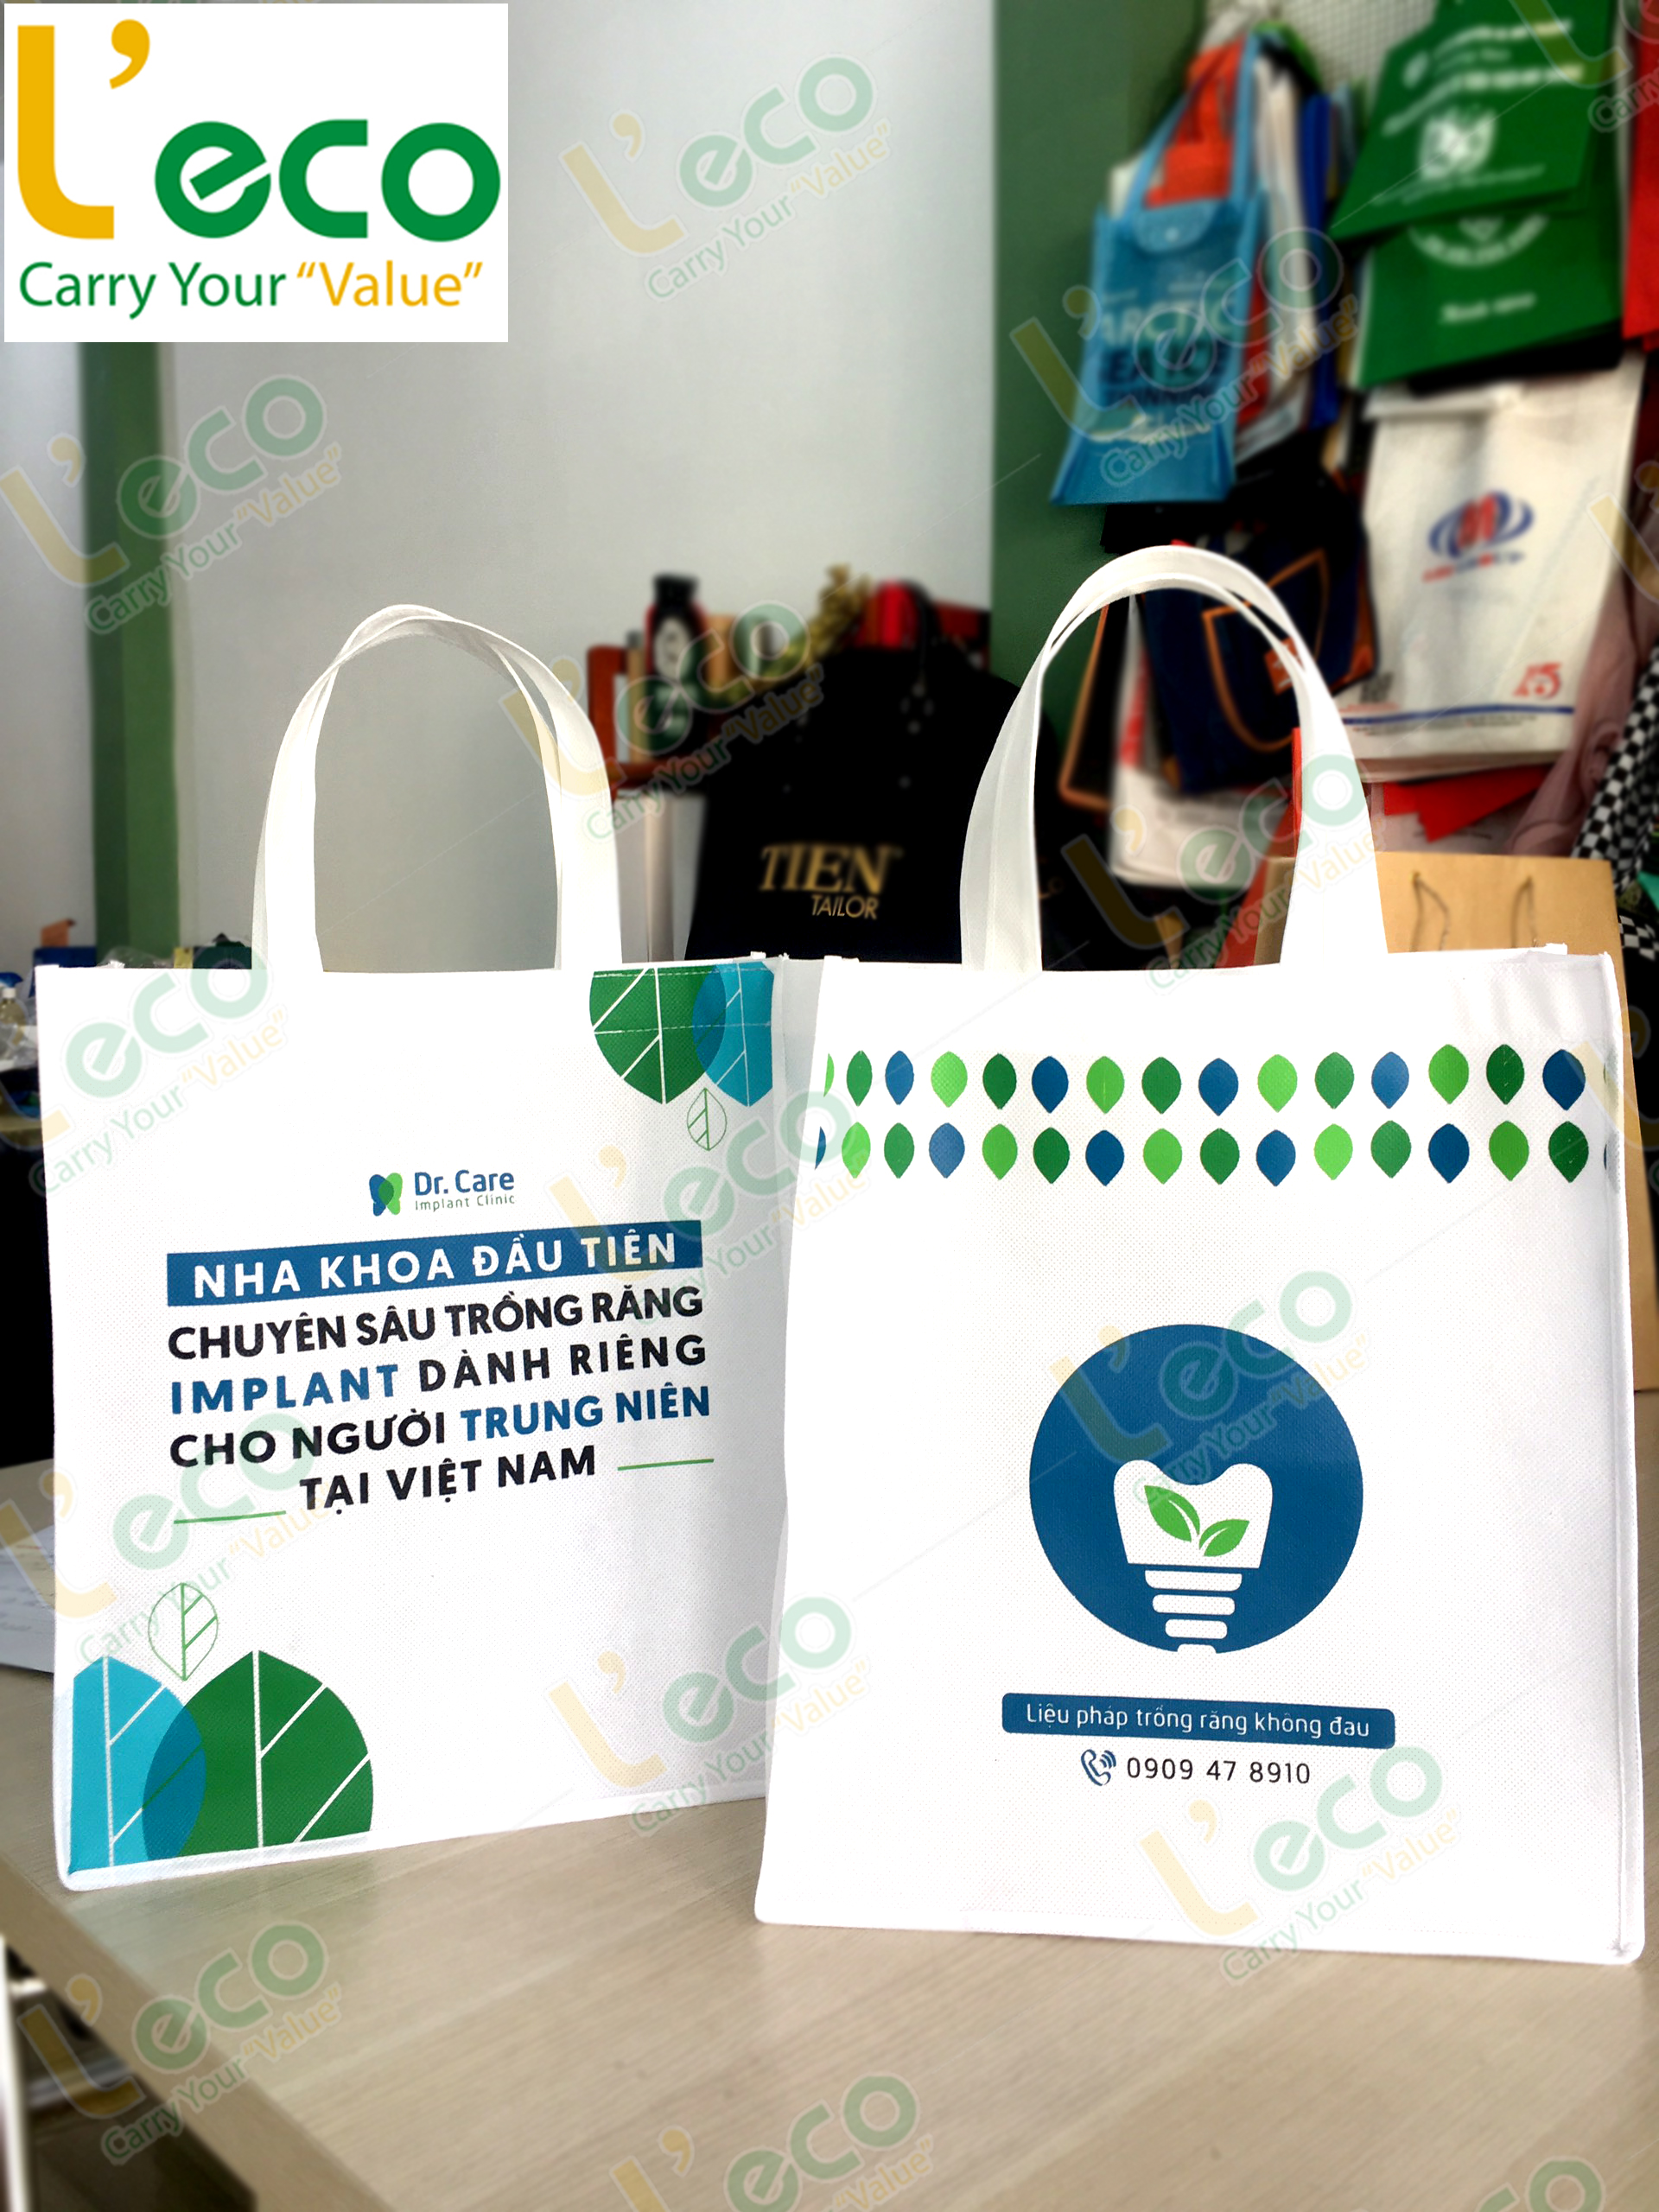 Tips to design impressive images on non-woven bags to help businesses promote their brands